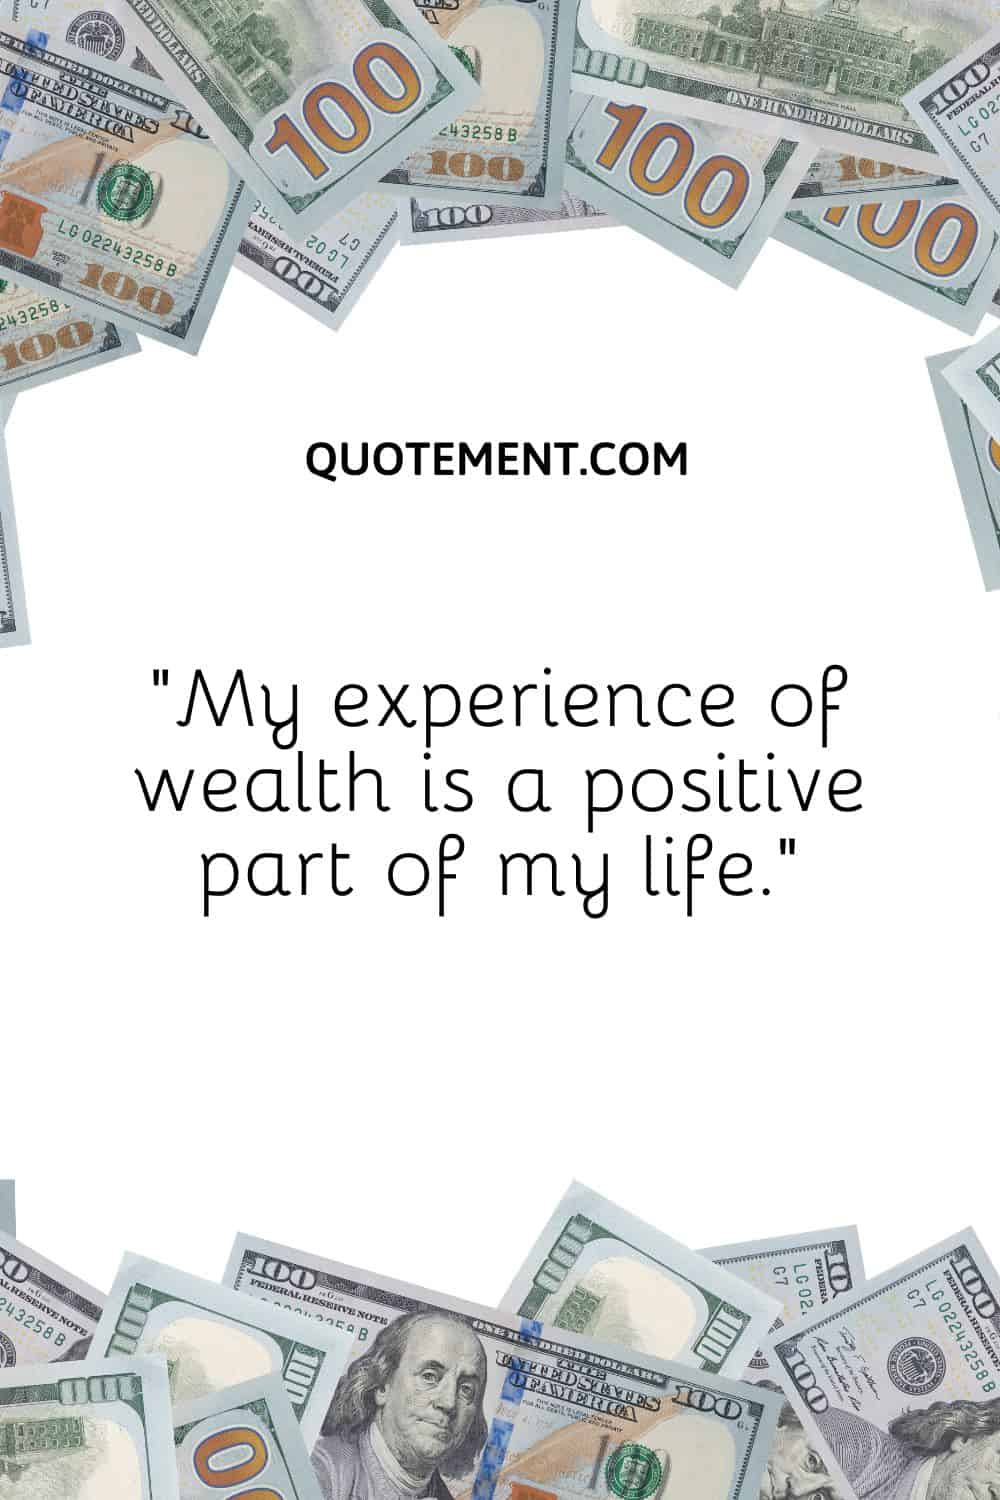 “My experience of wealth is a positive part of my life.”